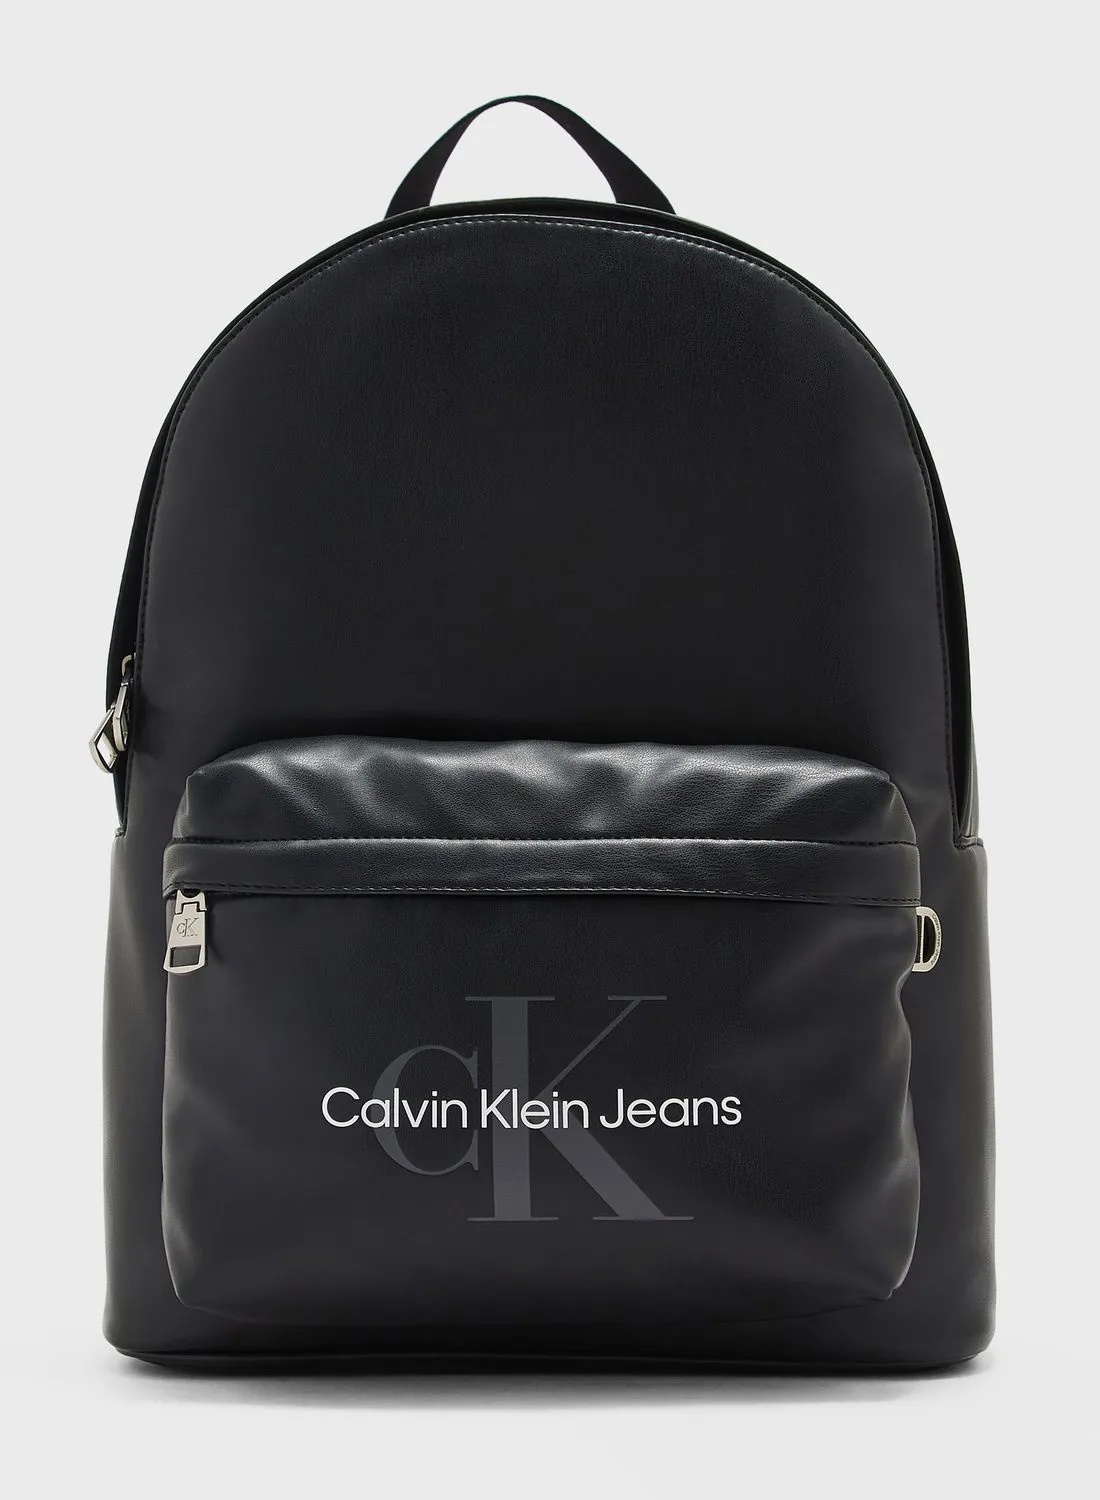 Calvin Klein Jeans Logo Casual Backpack